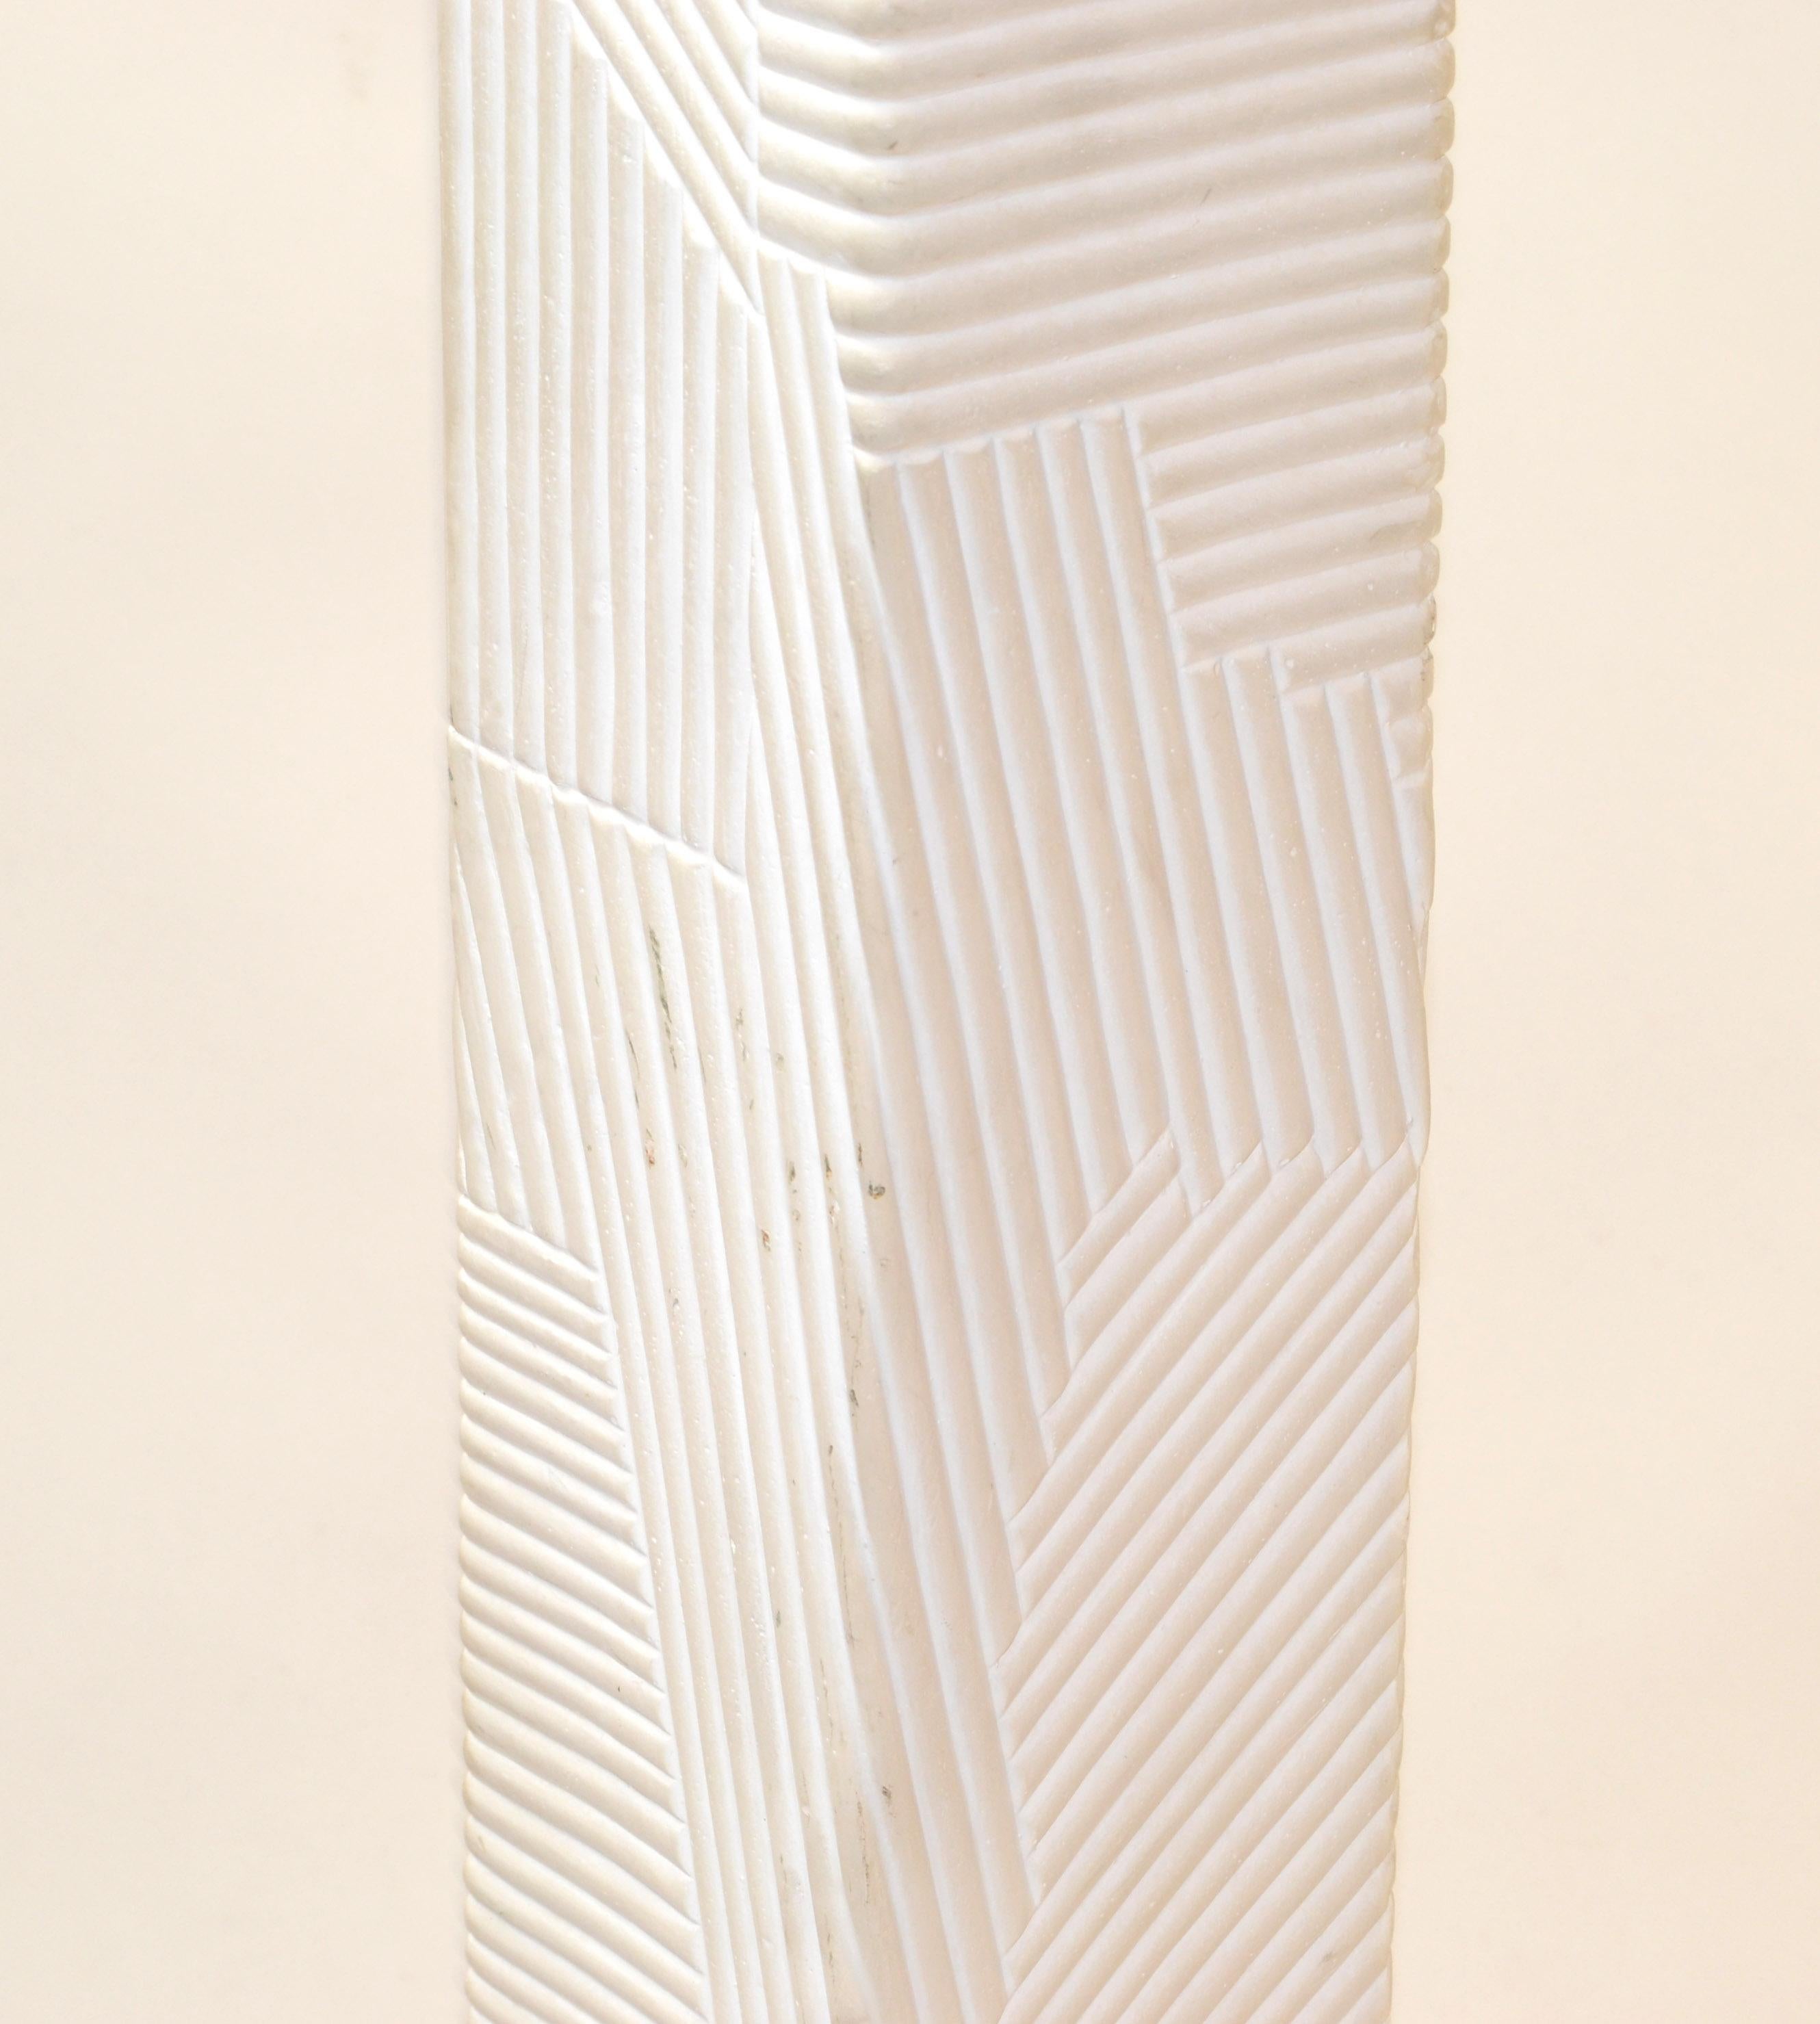 1970 Mid-Century Modern Geometric Textured Iconic Sculptural Plaster Lamp Sirmos For Sale 2